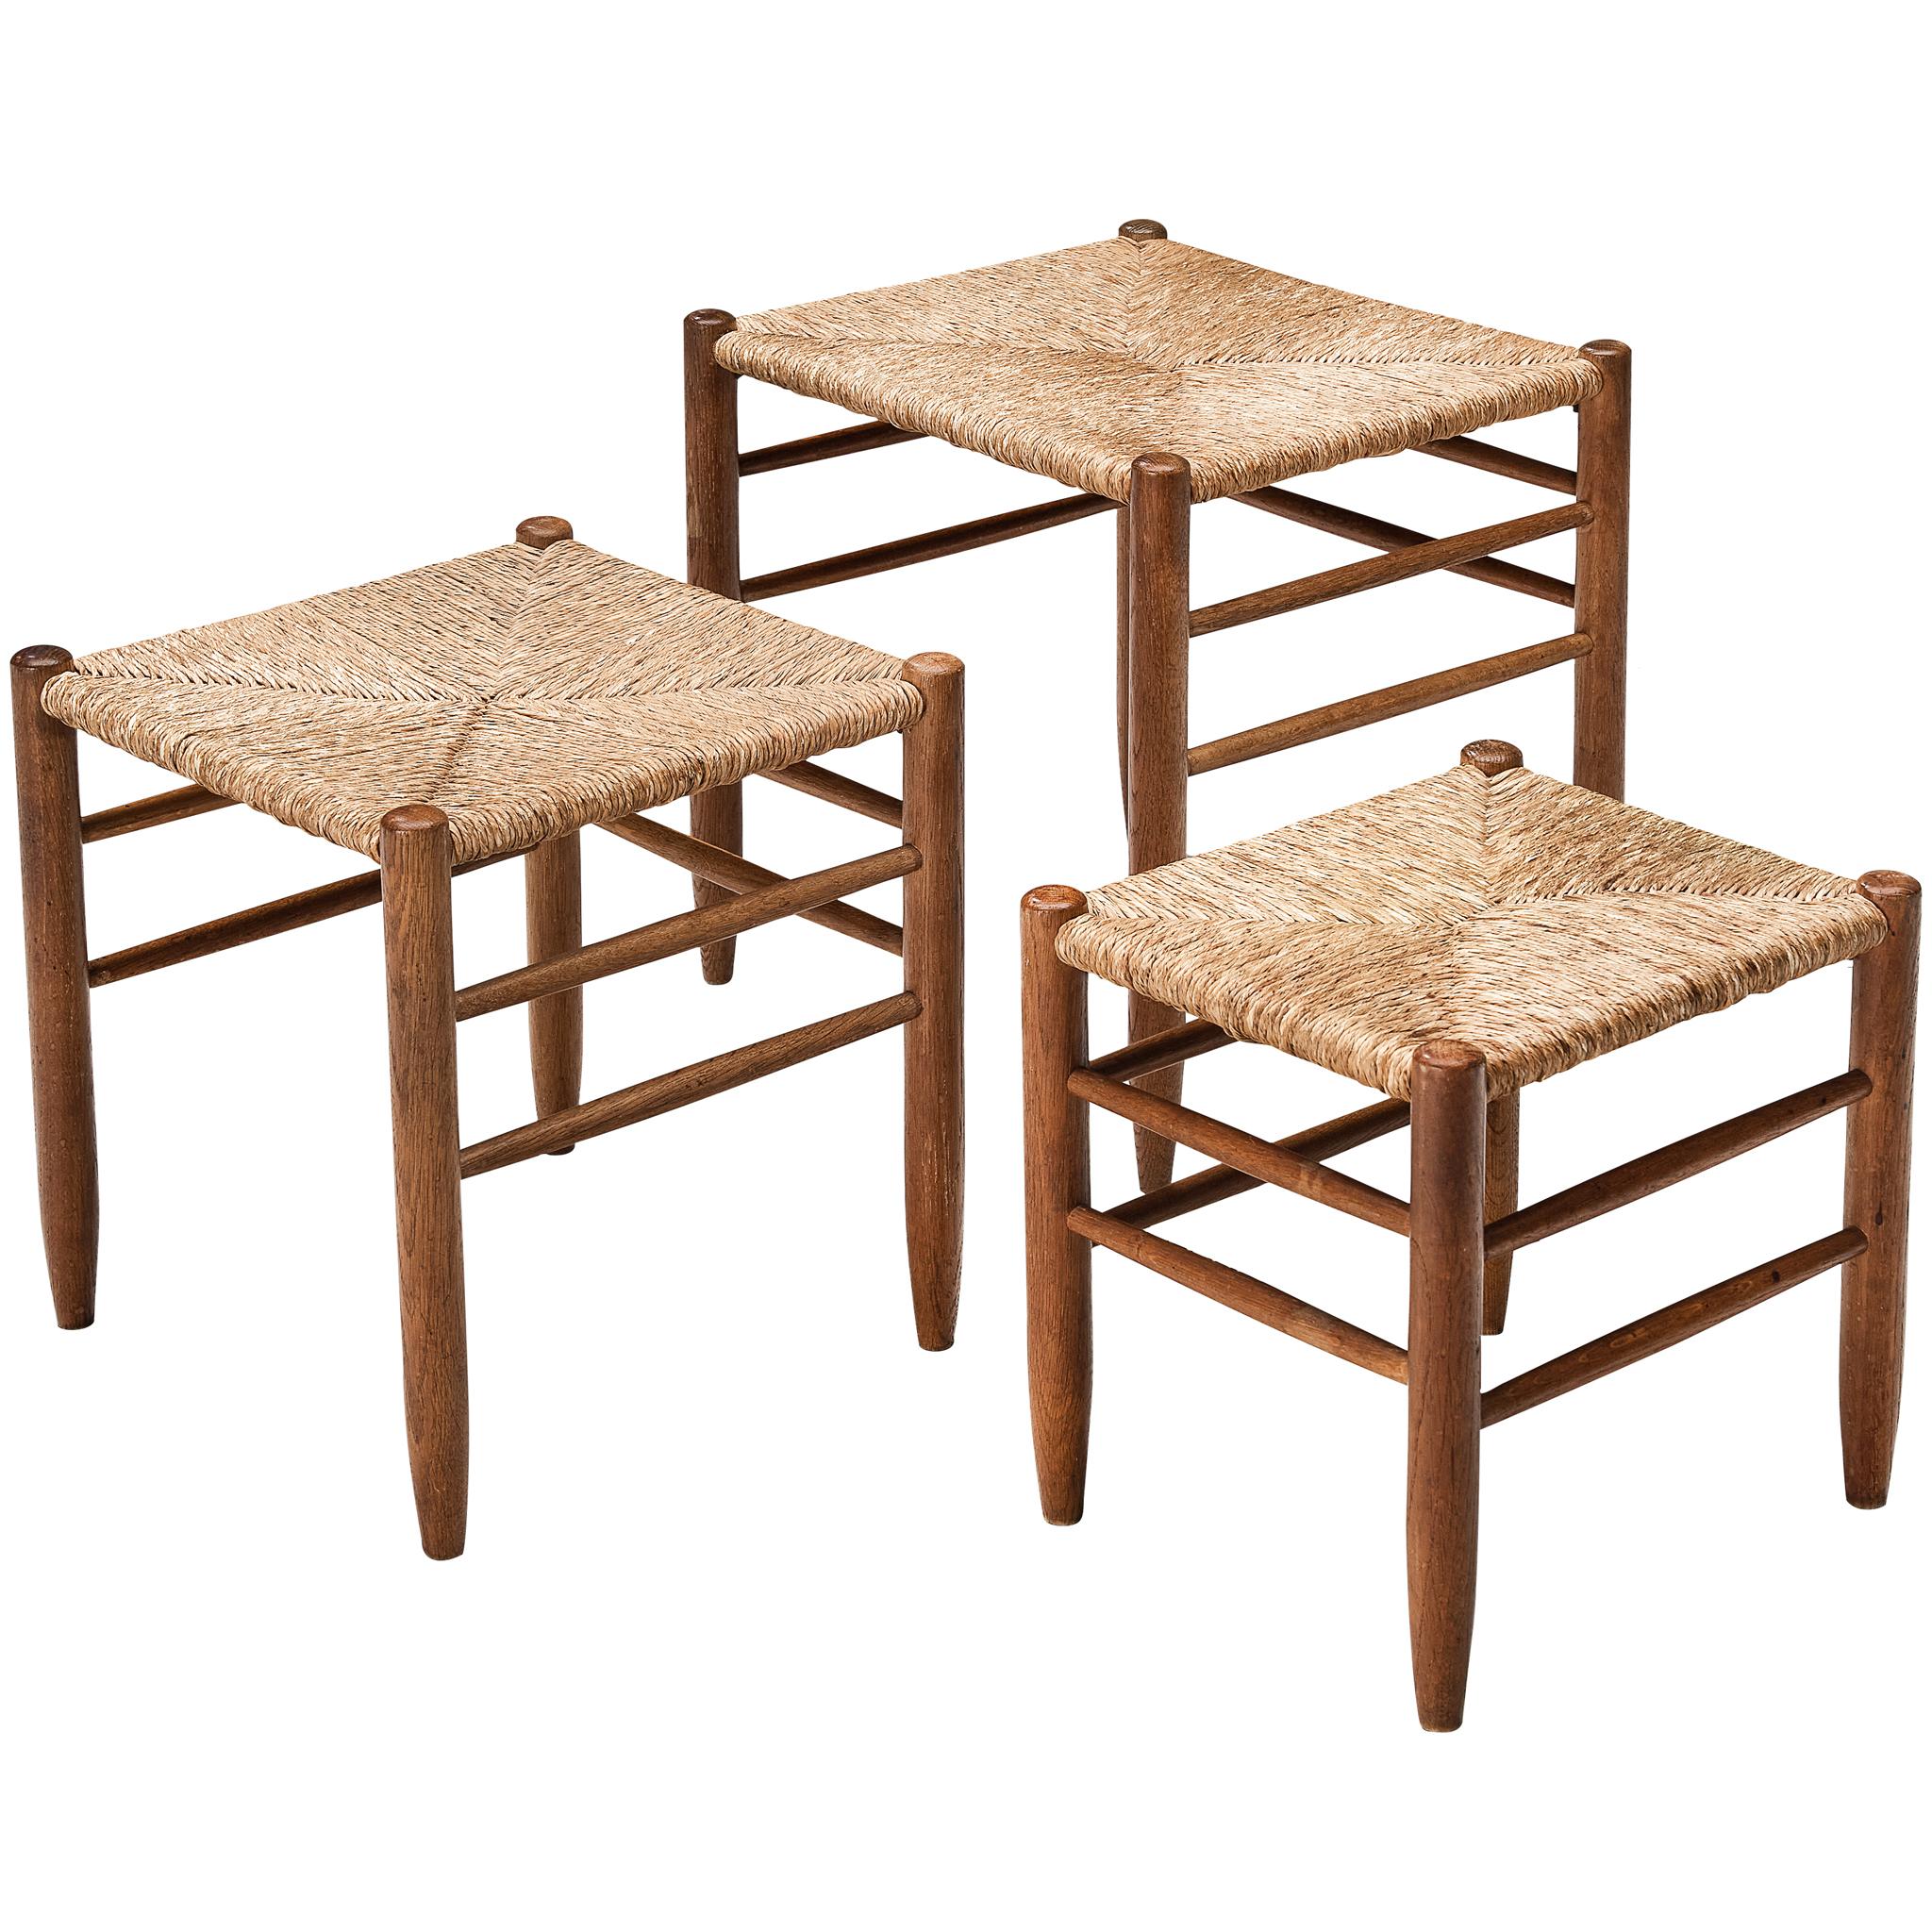 Set of Three Side Tables in Oak and Straw